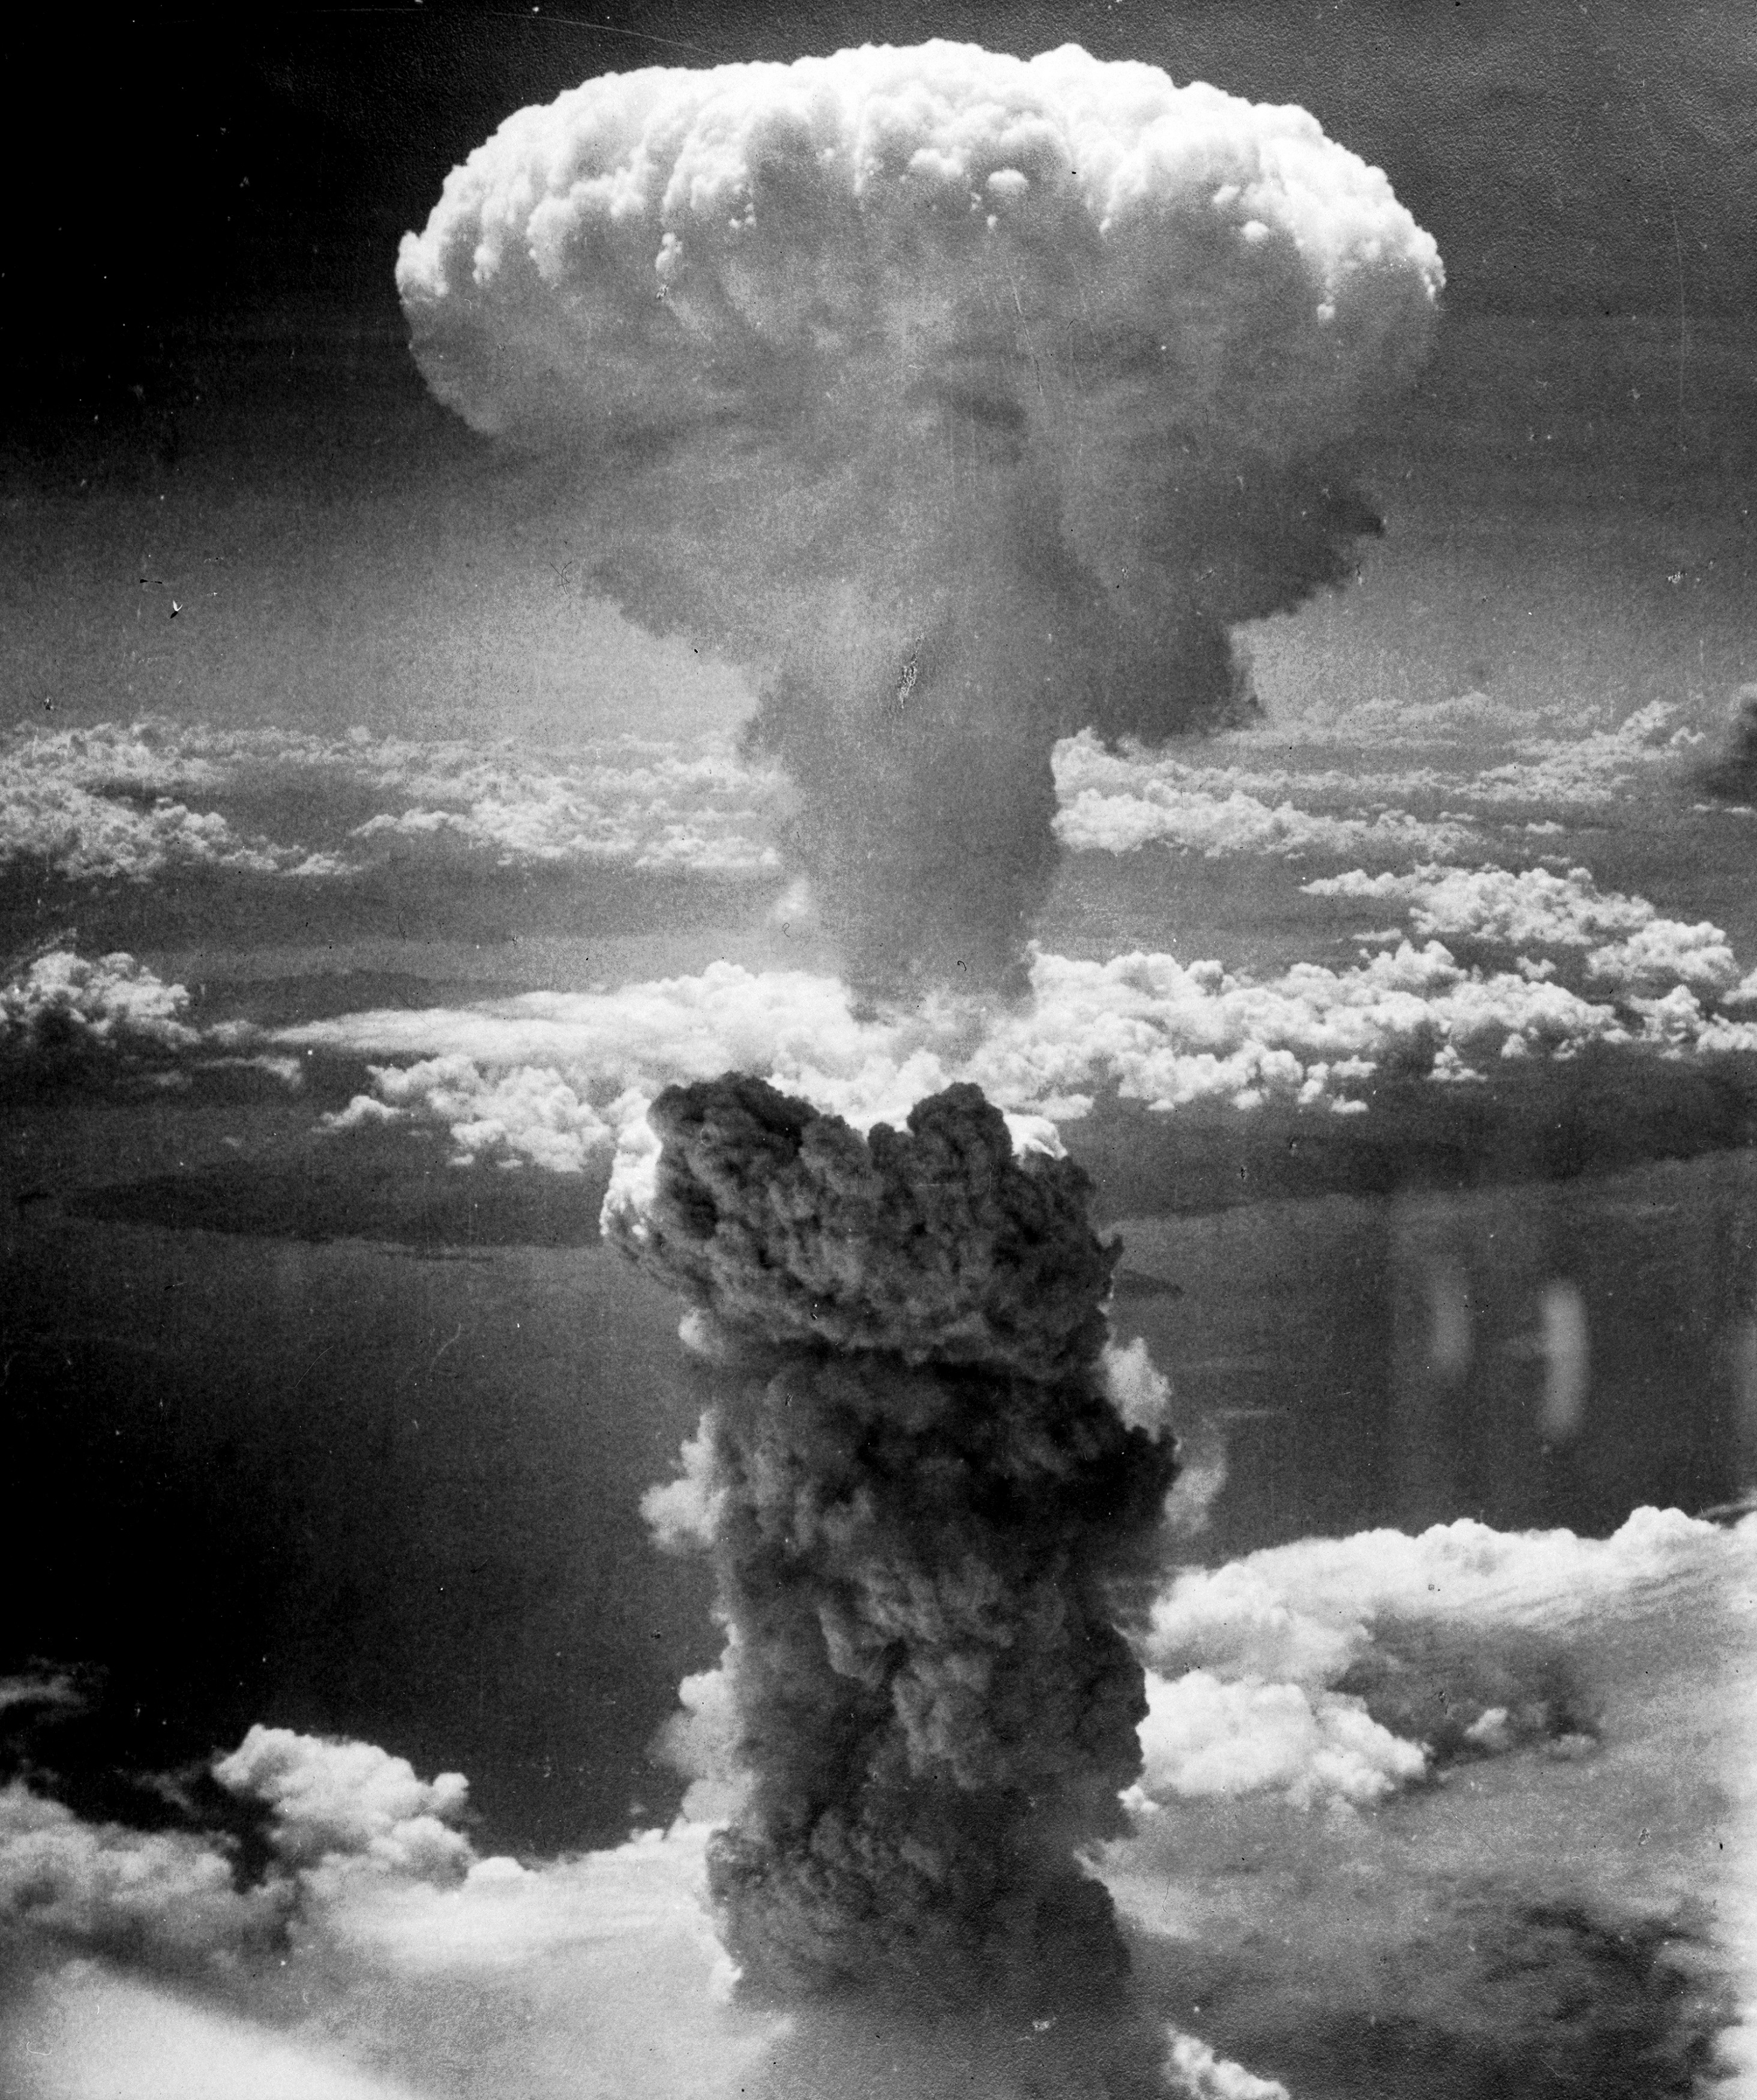 The cloud from the atomic bomb explosion